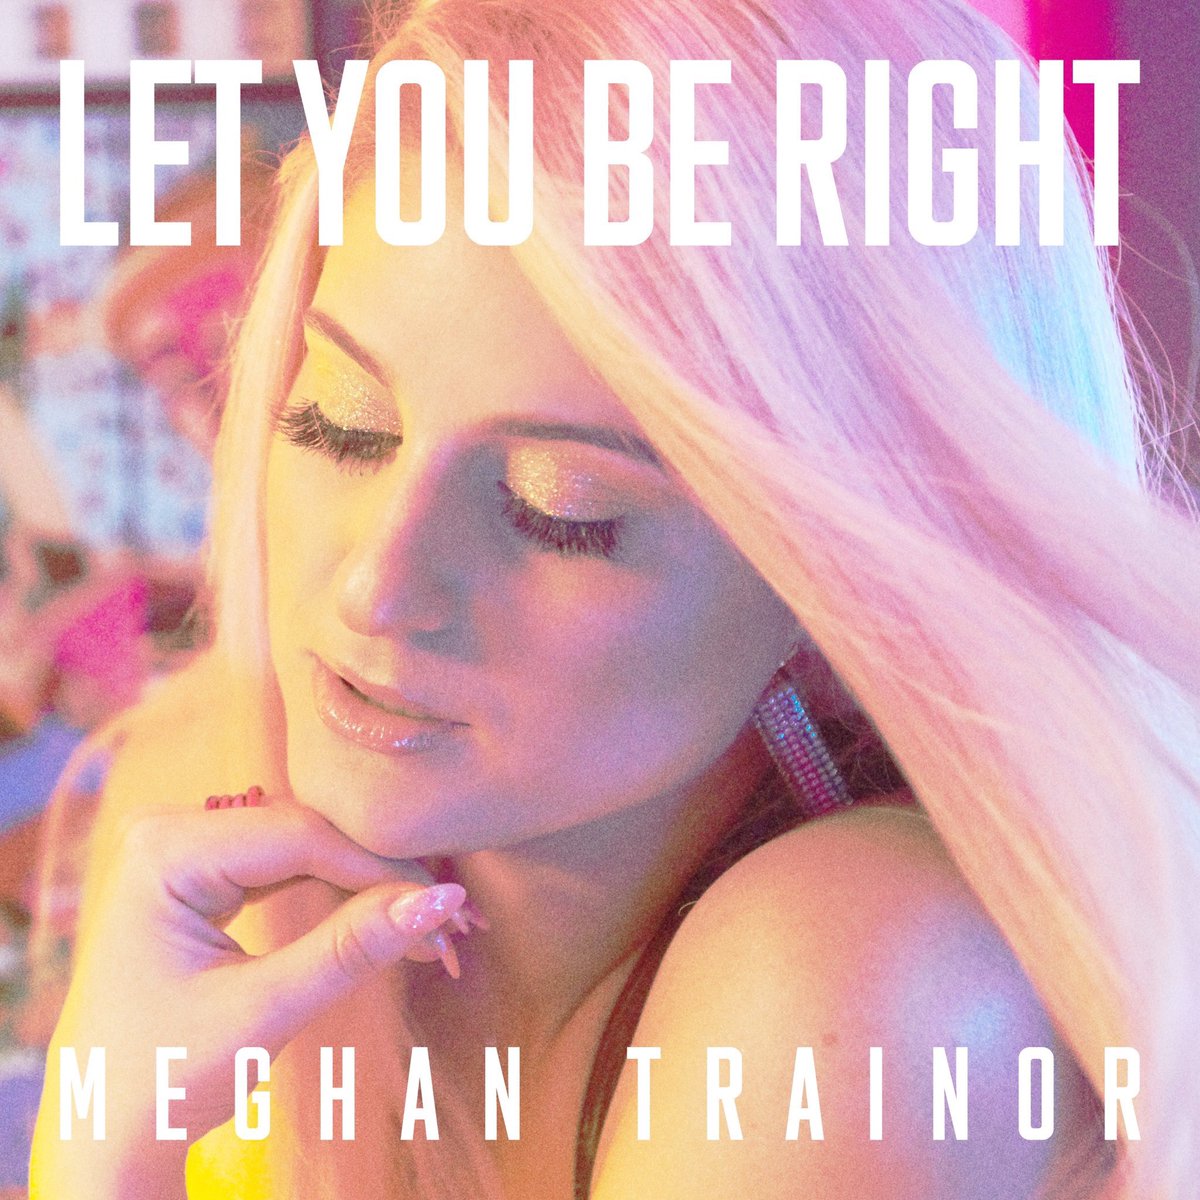 Let You Be Right | The Meghan Trainor Wiki | FANDOM powered by Wikia